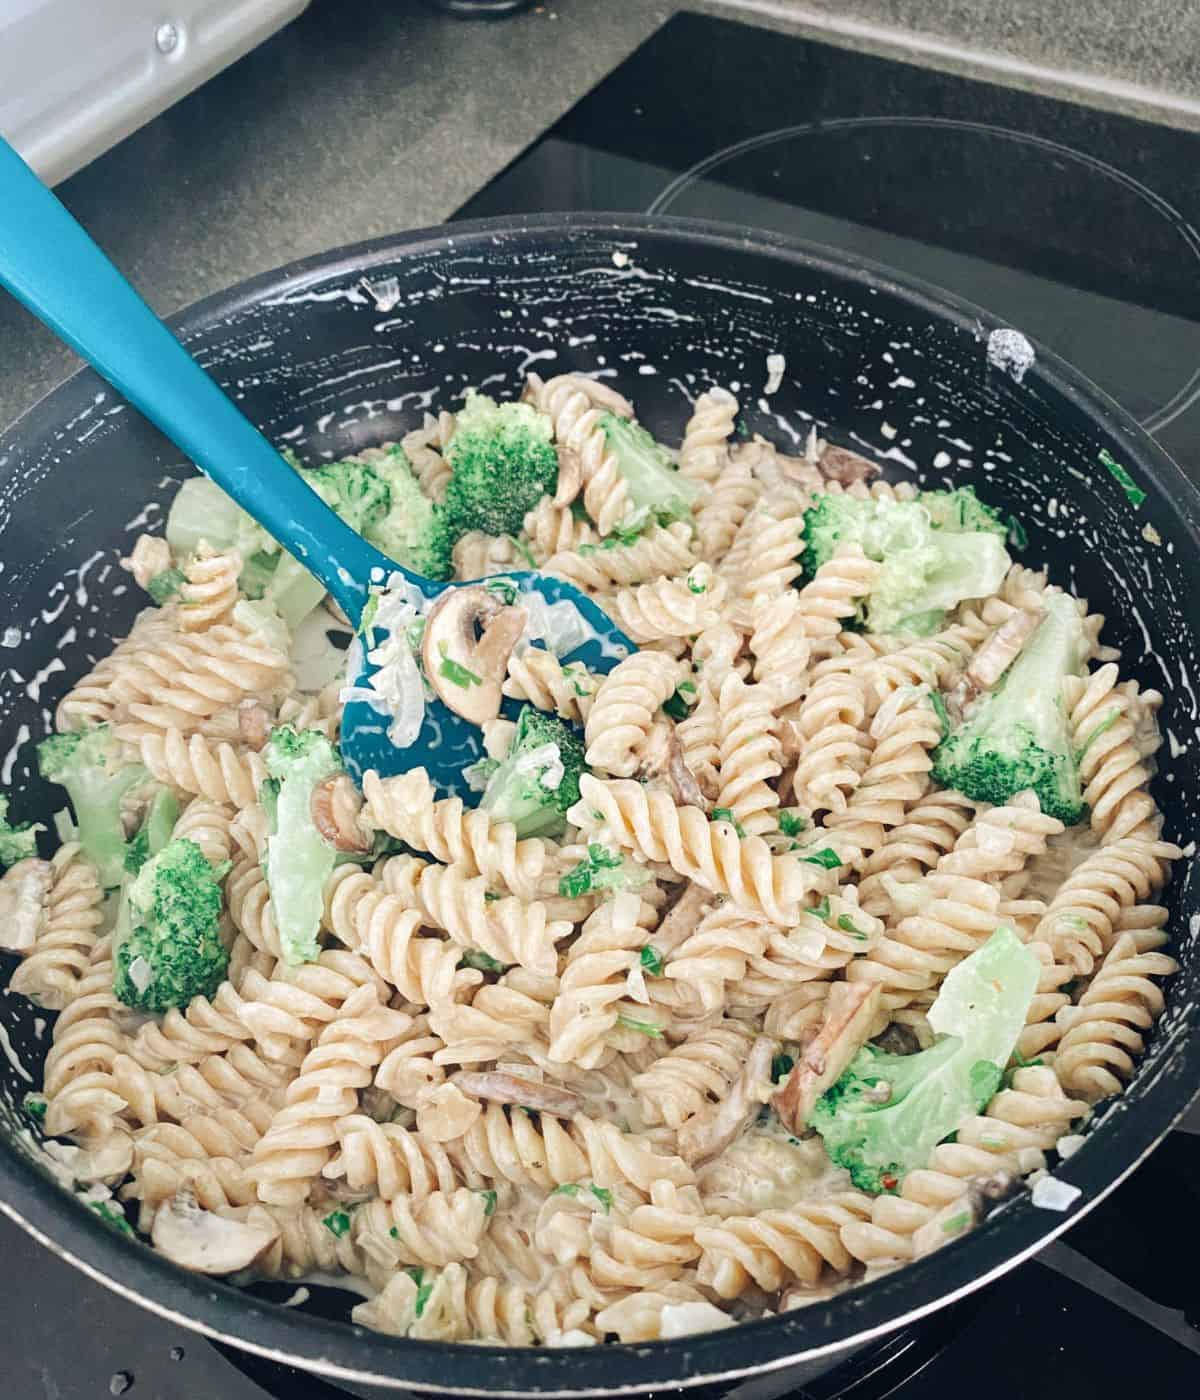 Creamy fusilli pasta with broccoli and mushroom being stirred in a frying pan.